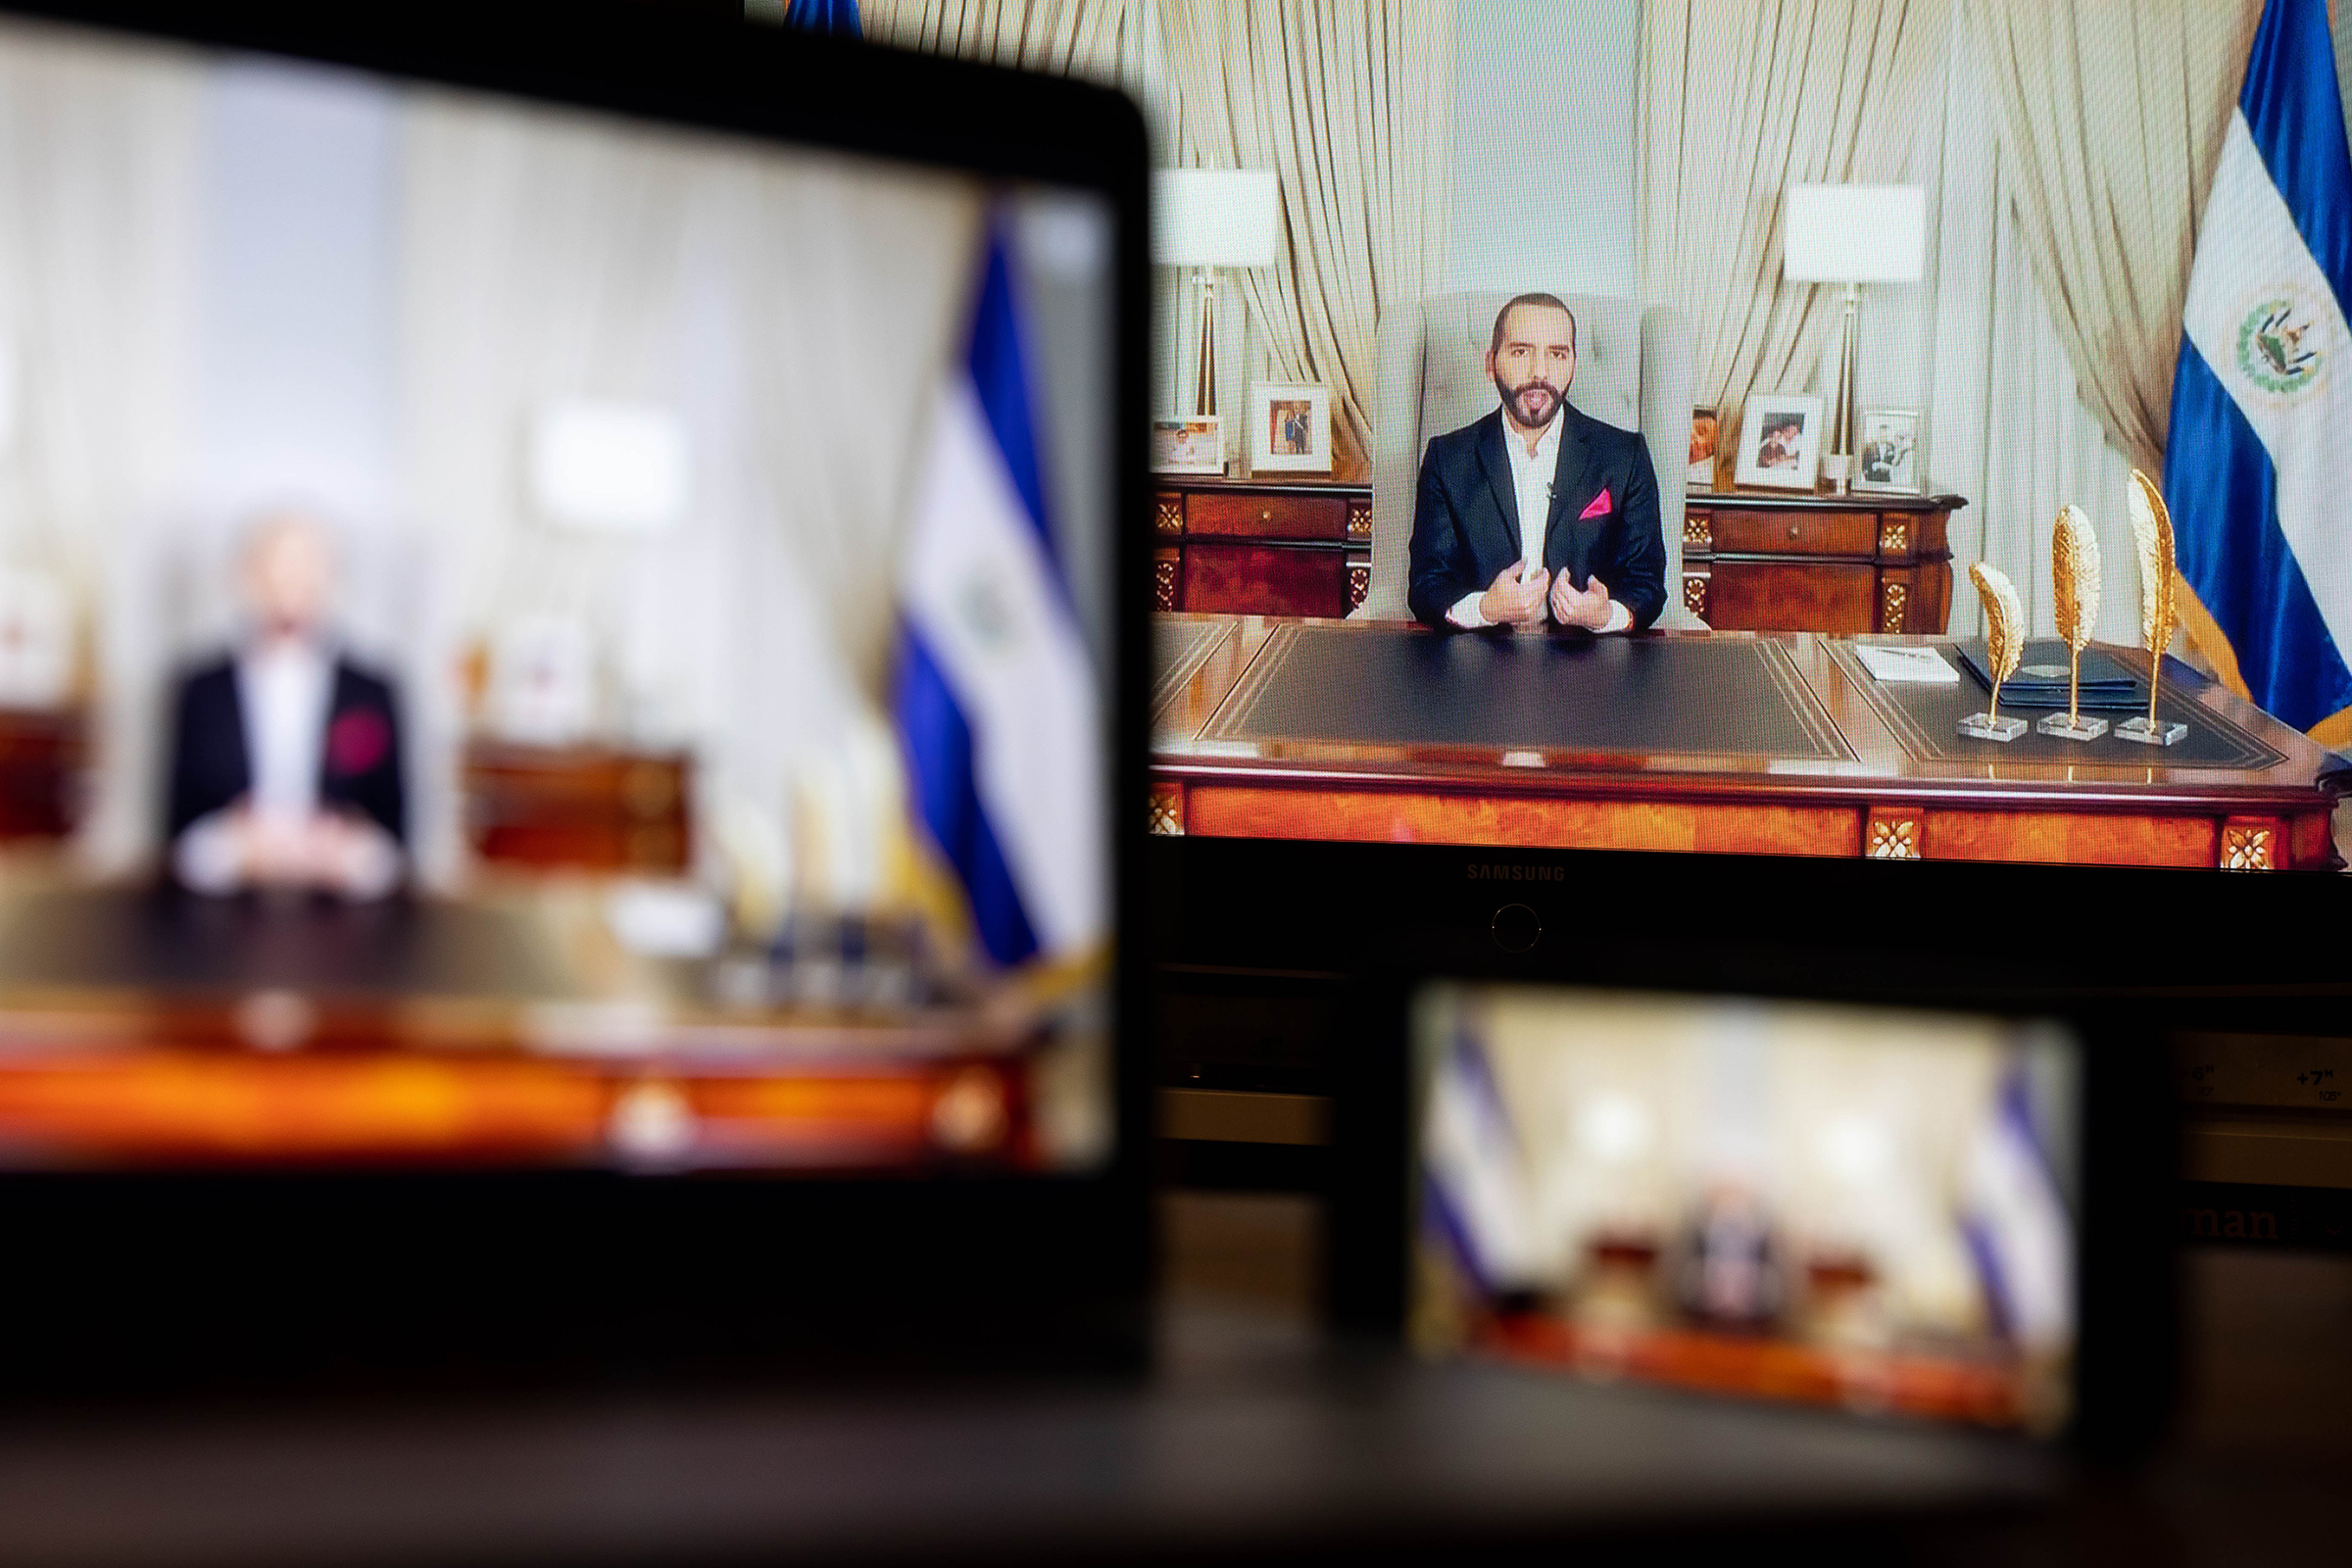 Nayib Bukele, El Salvador's president, speaks in a prerecorded video during the United Nations General Assembly via live stream in New York on Sept. 23, 2021.